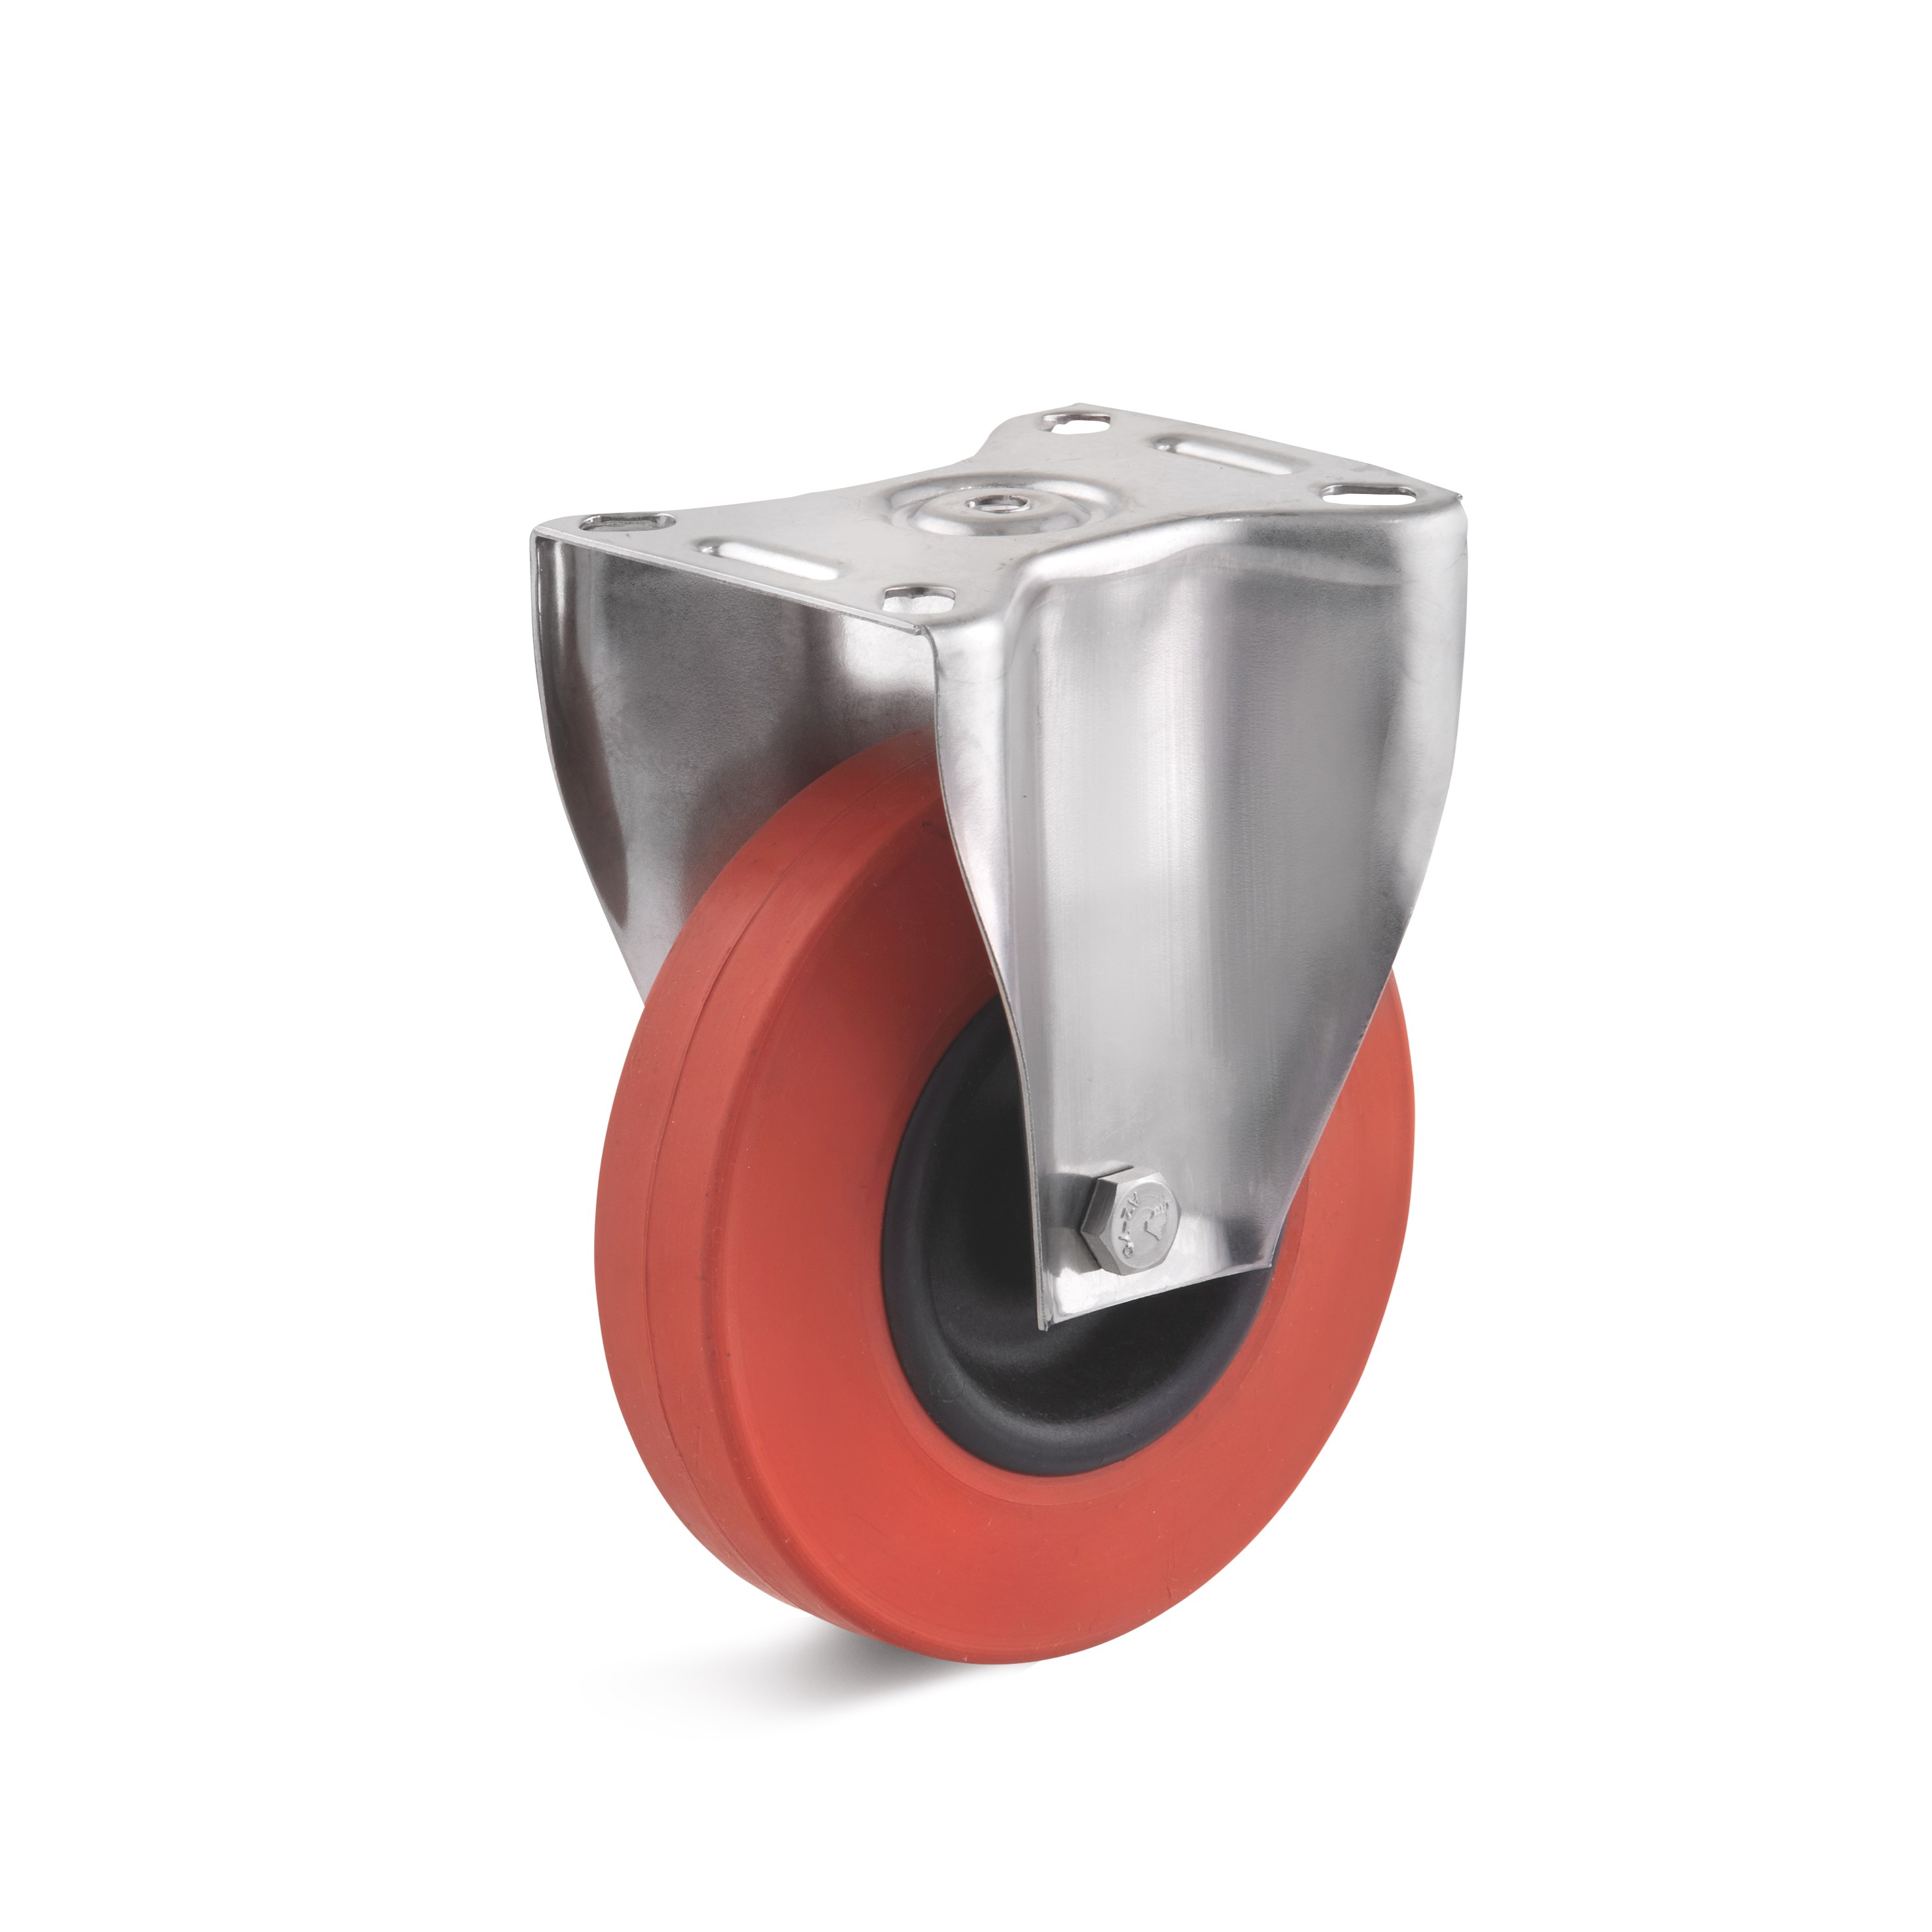 Stainless steel fixed castor with heat-resistant rubber wheel